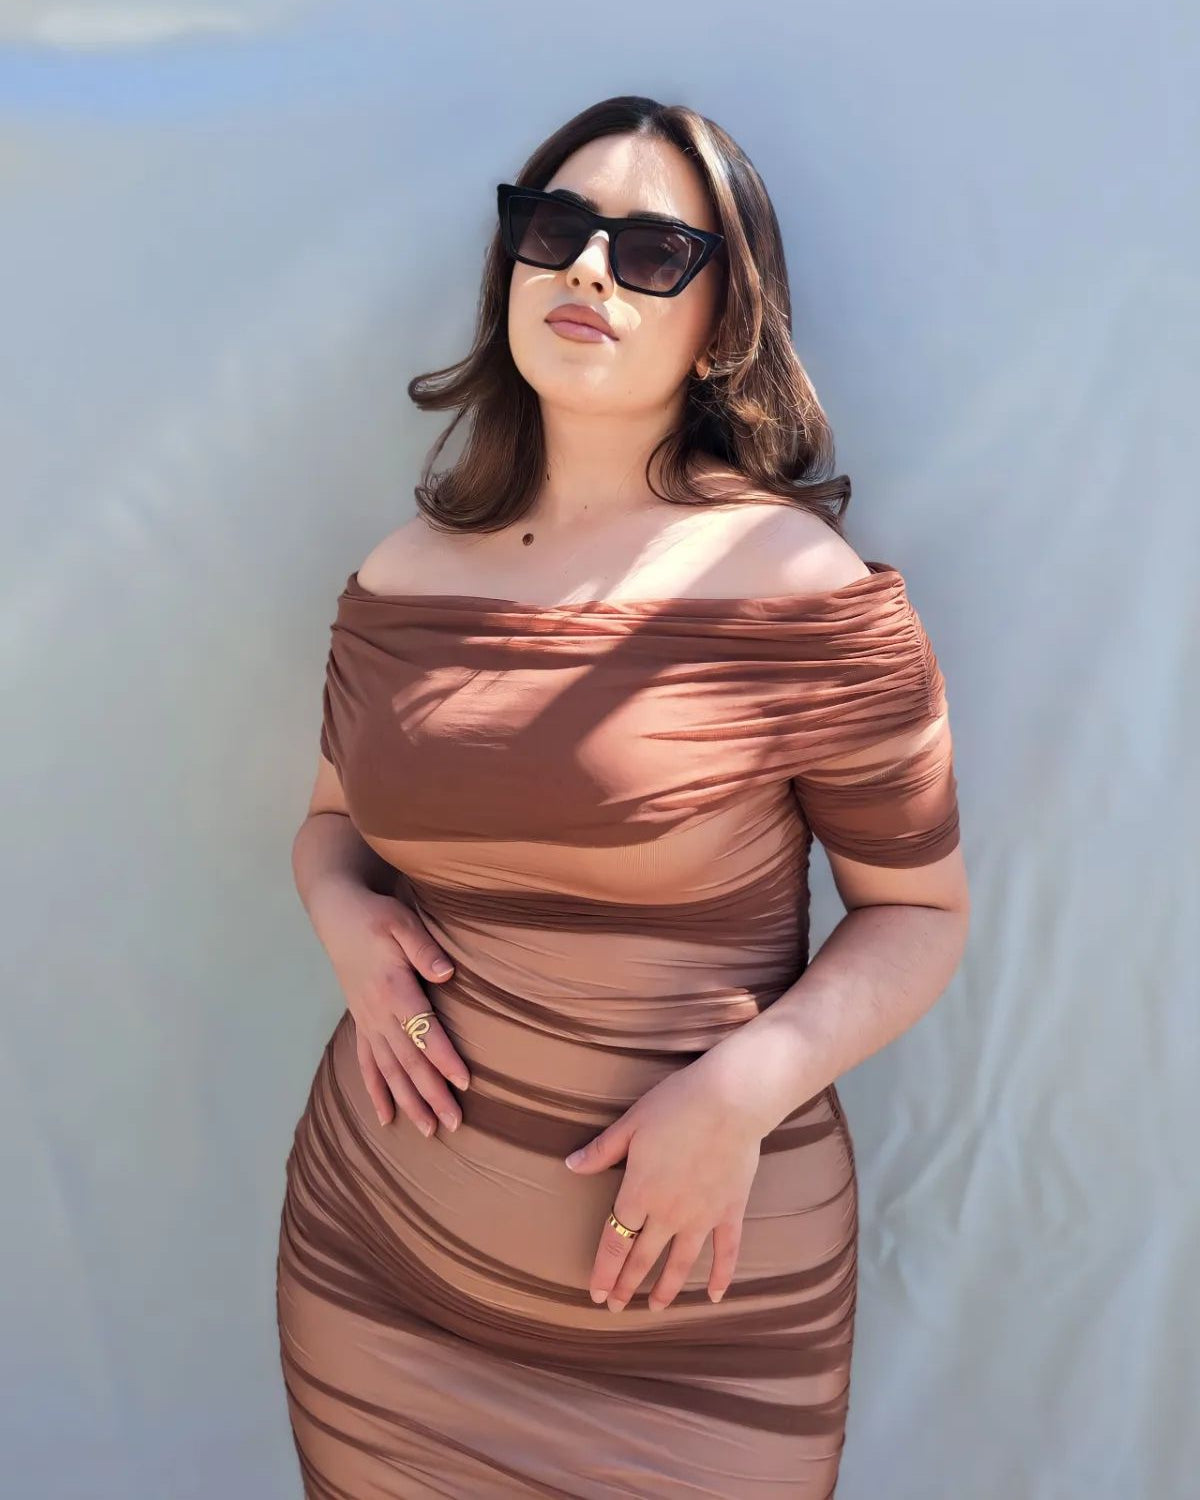 Off Shoulder Short Sleeve Ruched Midi Bodycon Dress